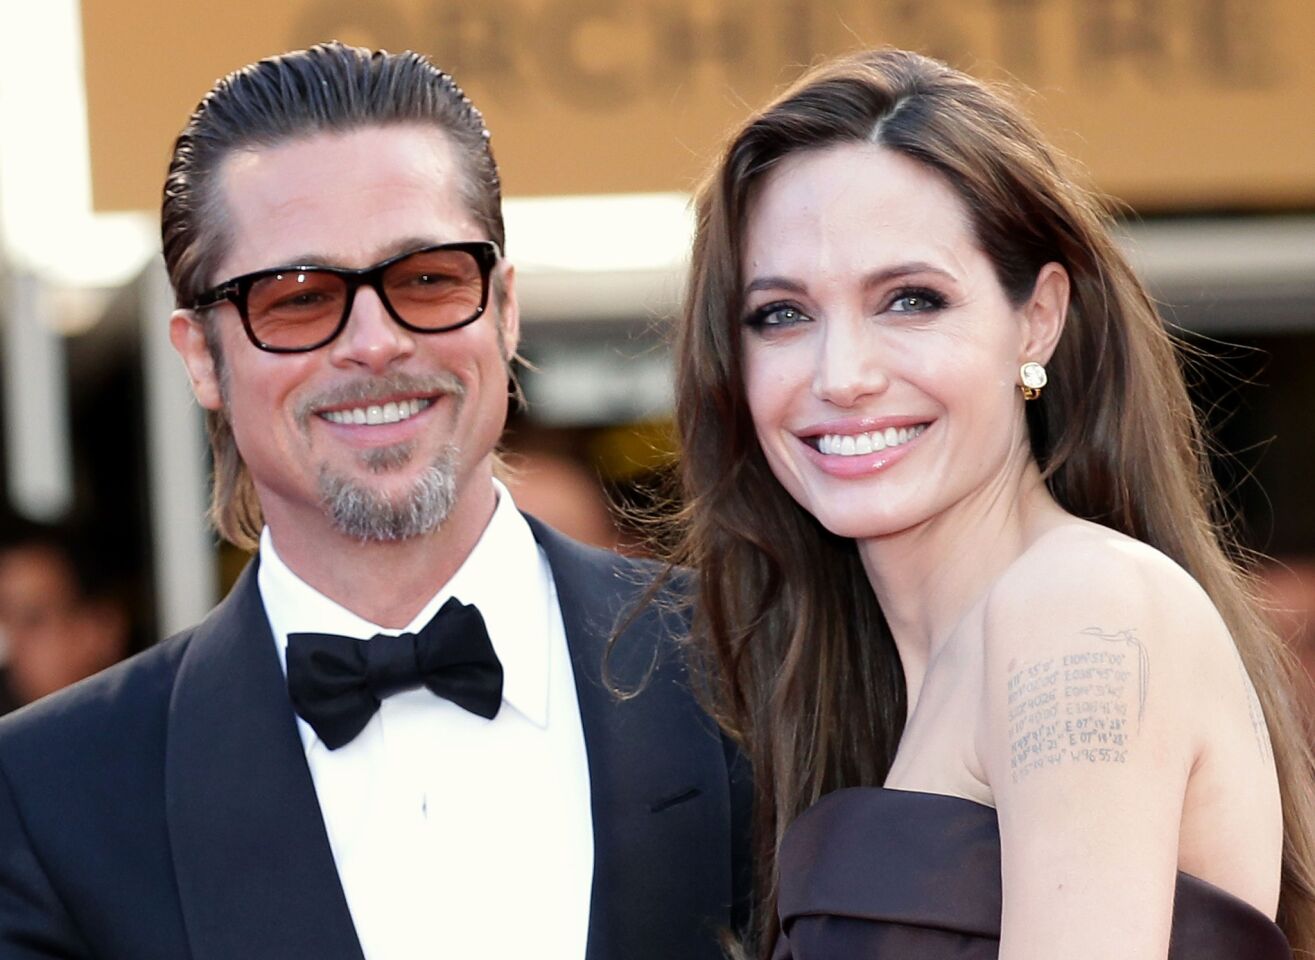 Angelina Jolie and Brad Pitt were married Saturday in France, reports say. The couple, seen here at the premiere of "The Tree Of Life" at the Cannes Film Festival in May, had been engaged since 2012.